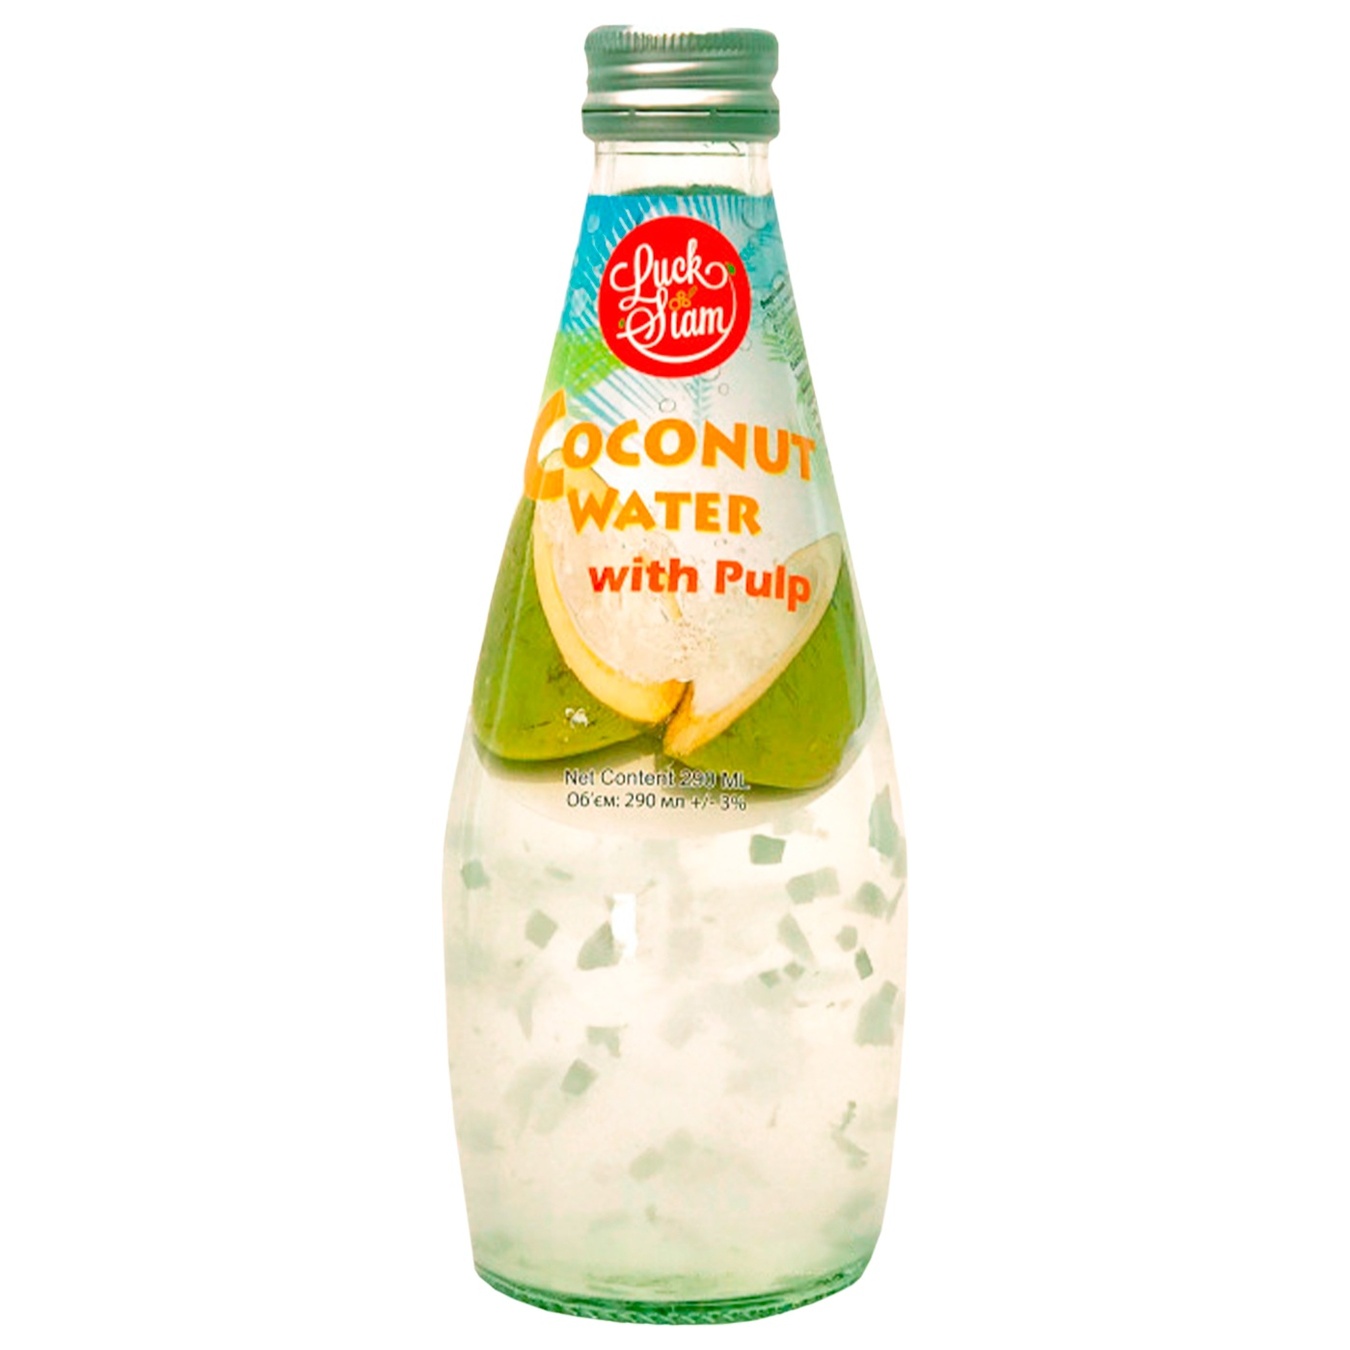 Luck Siam Coconut water with Pulp 290ml